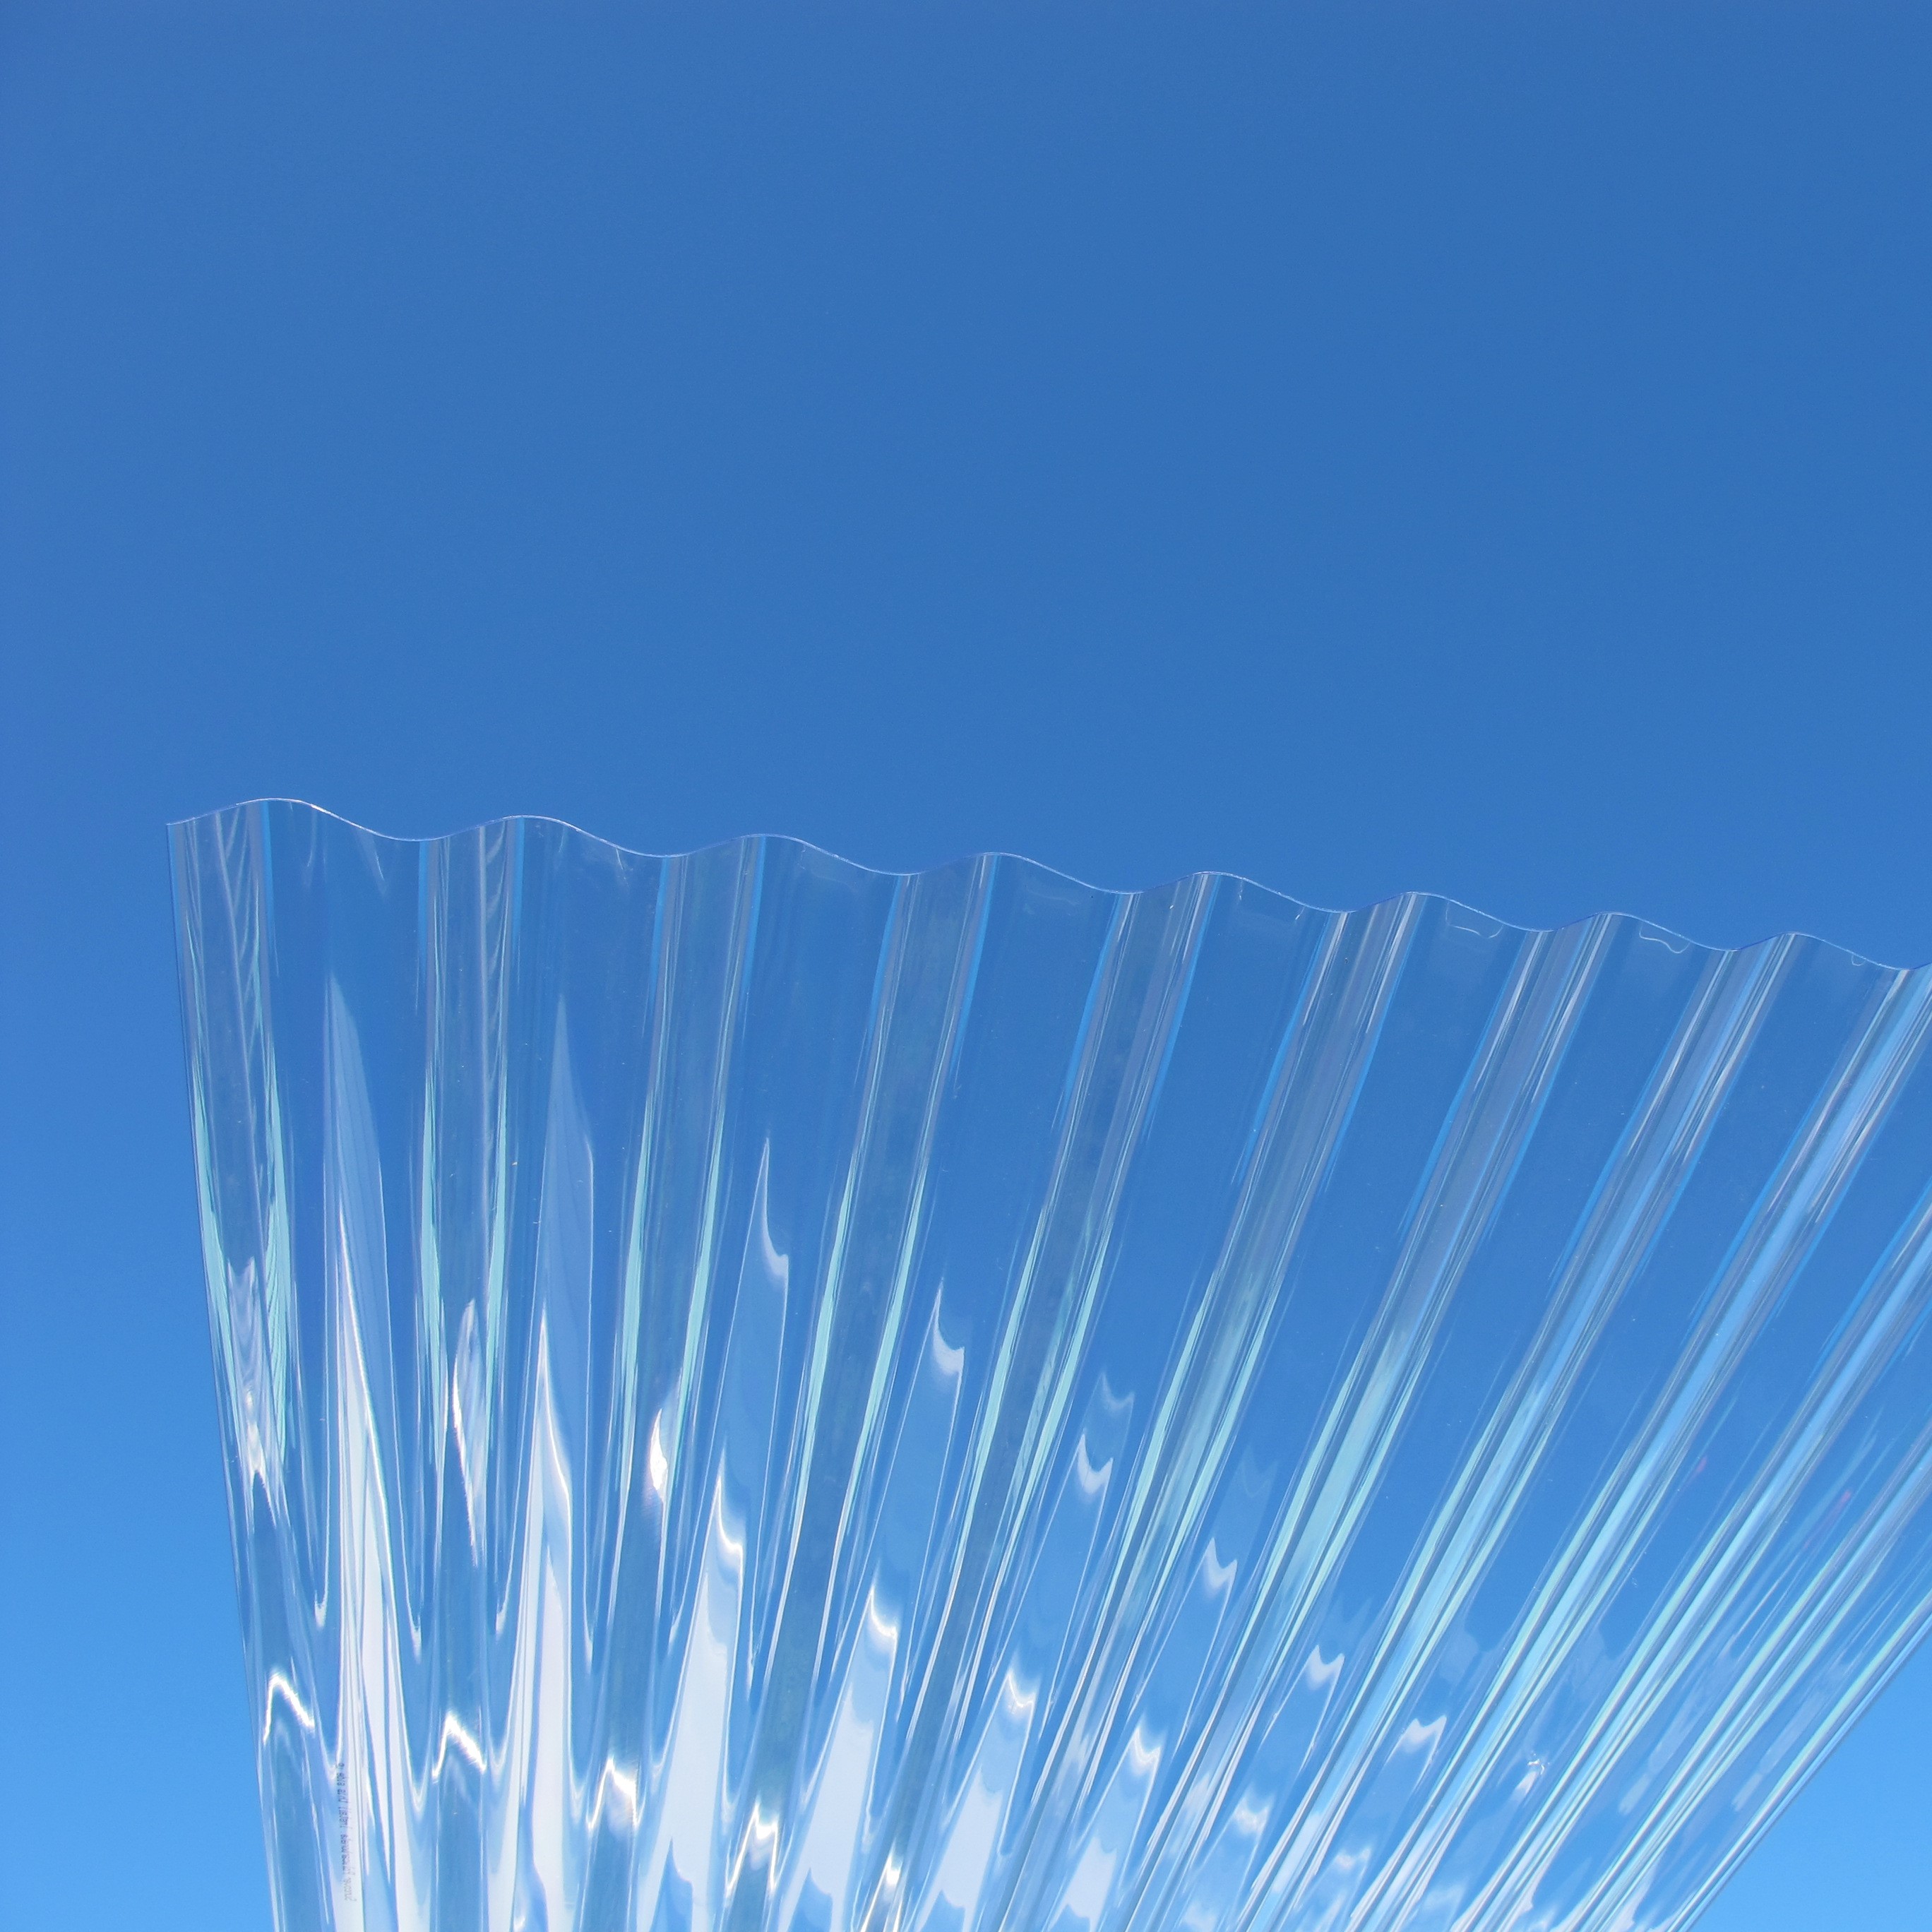 Corrugated Plastic Roofing Nz, Clear Corrugated Plastic Sheets